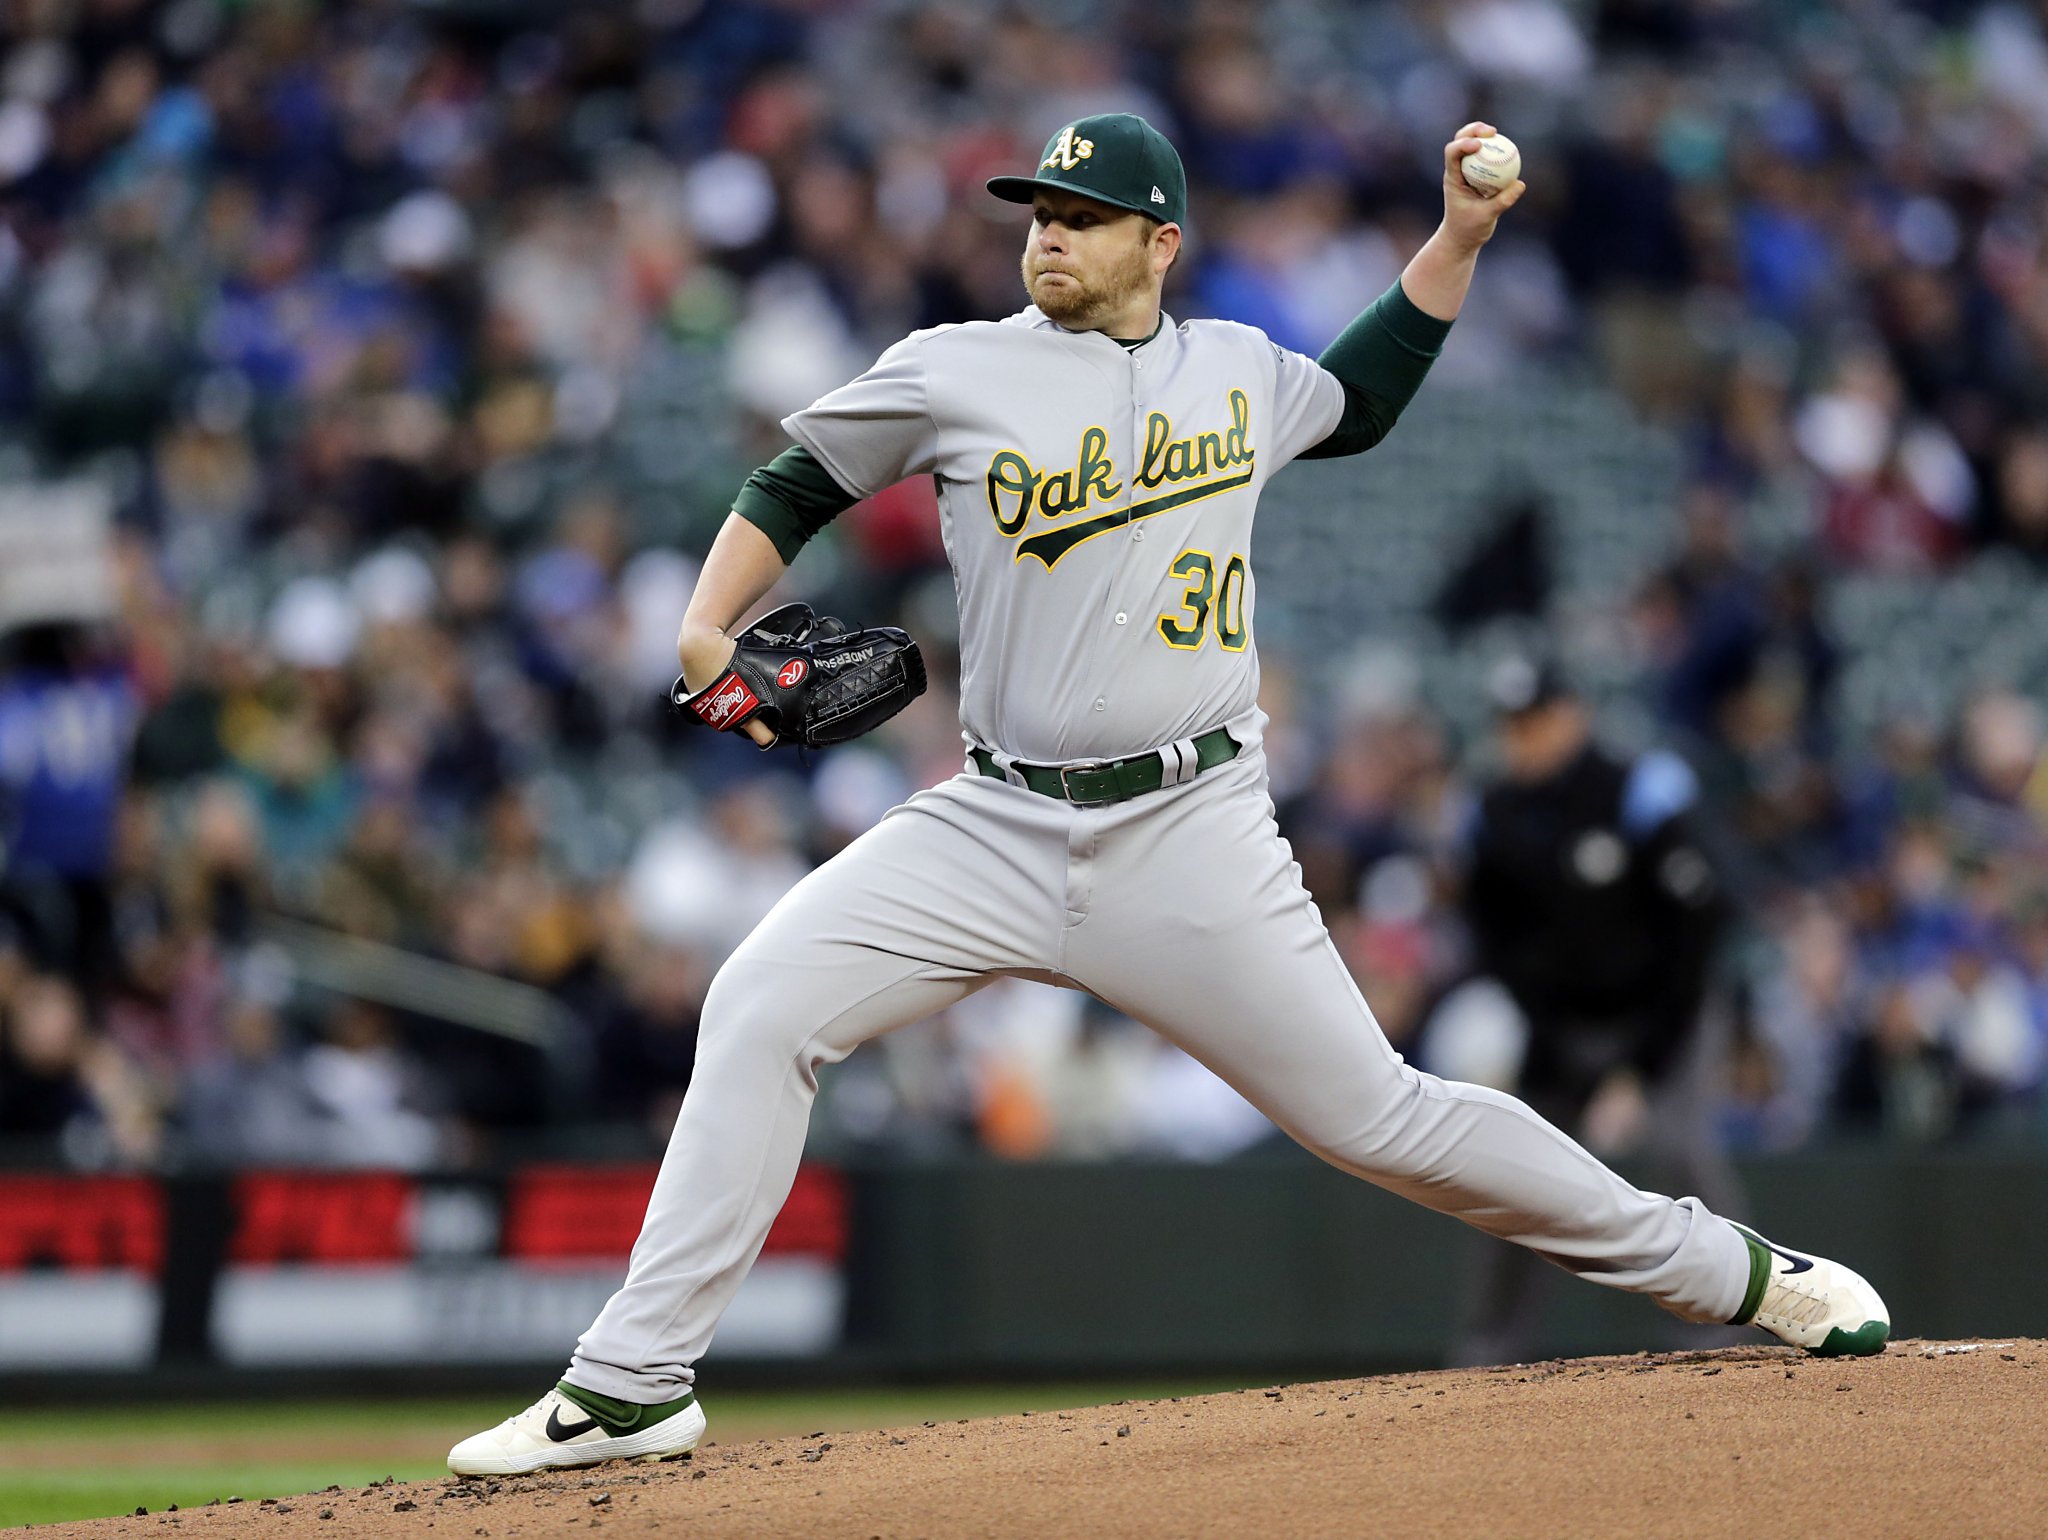 Homer Bailey, Oakland A's top Seattle Mariners